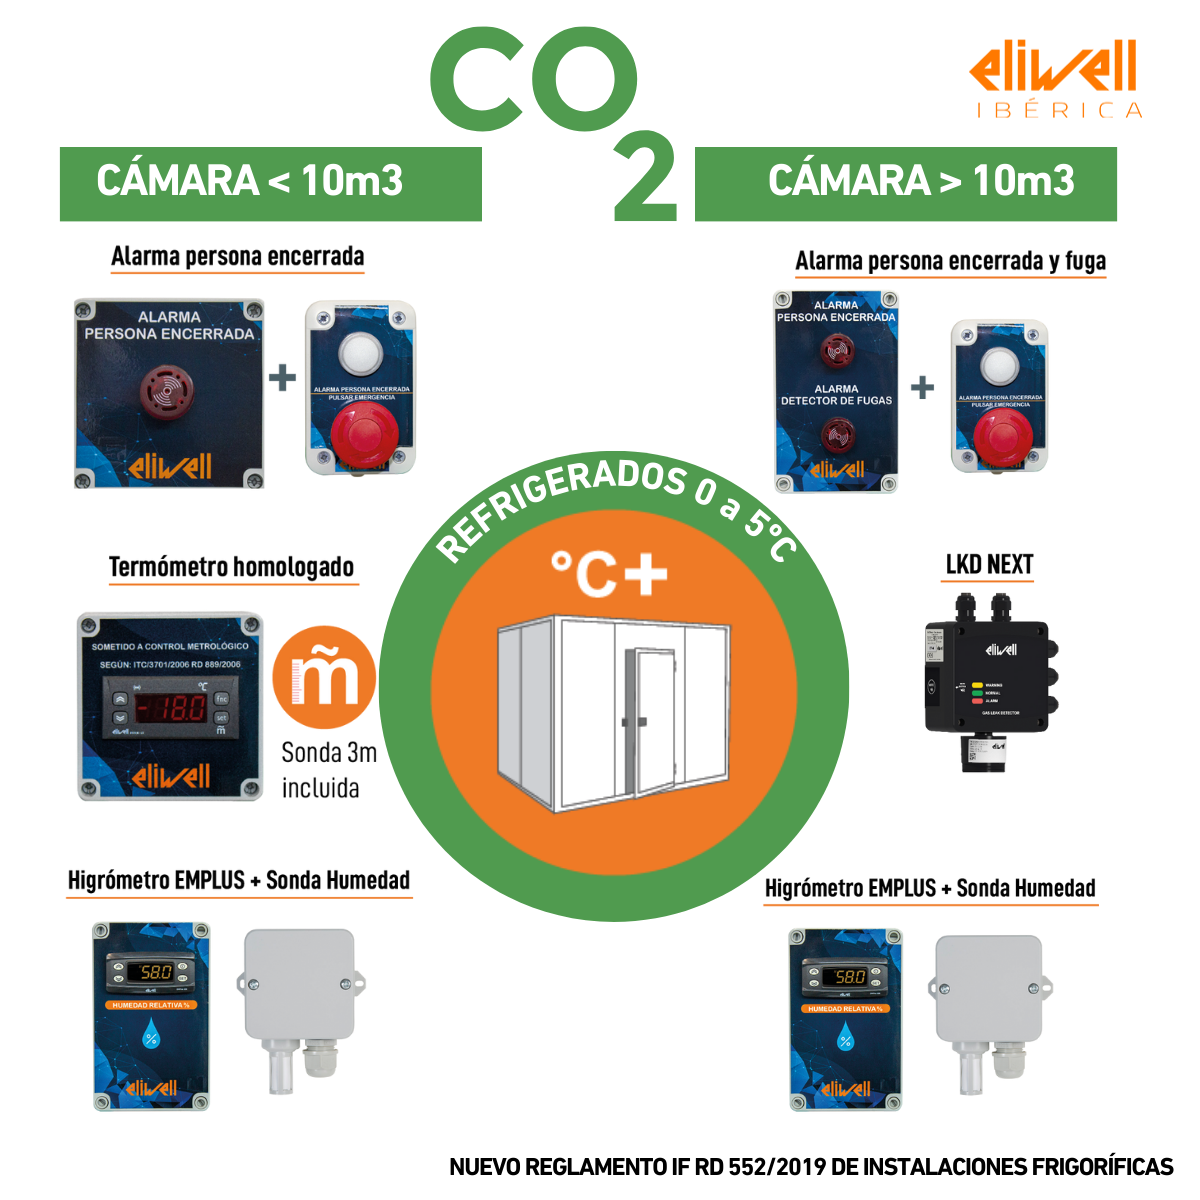 Image with the alarm and signaling systems required by current regulations for cold rooms in Spain with CO2.